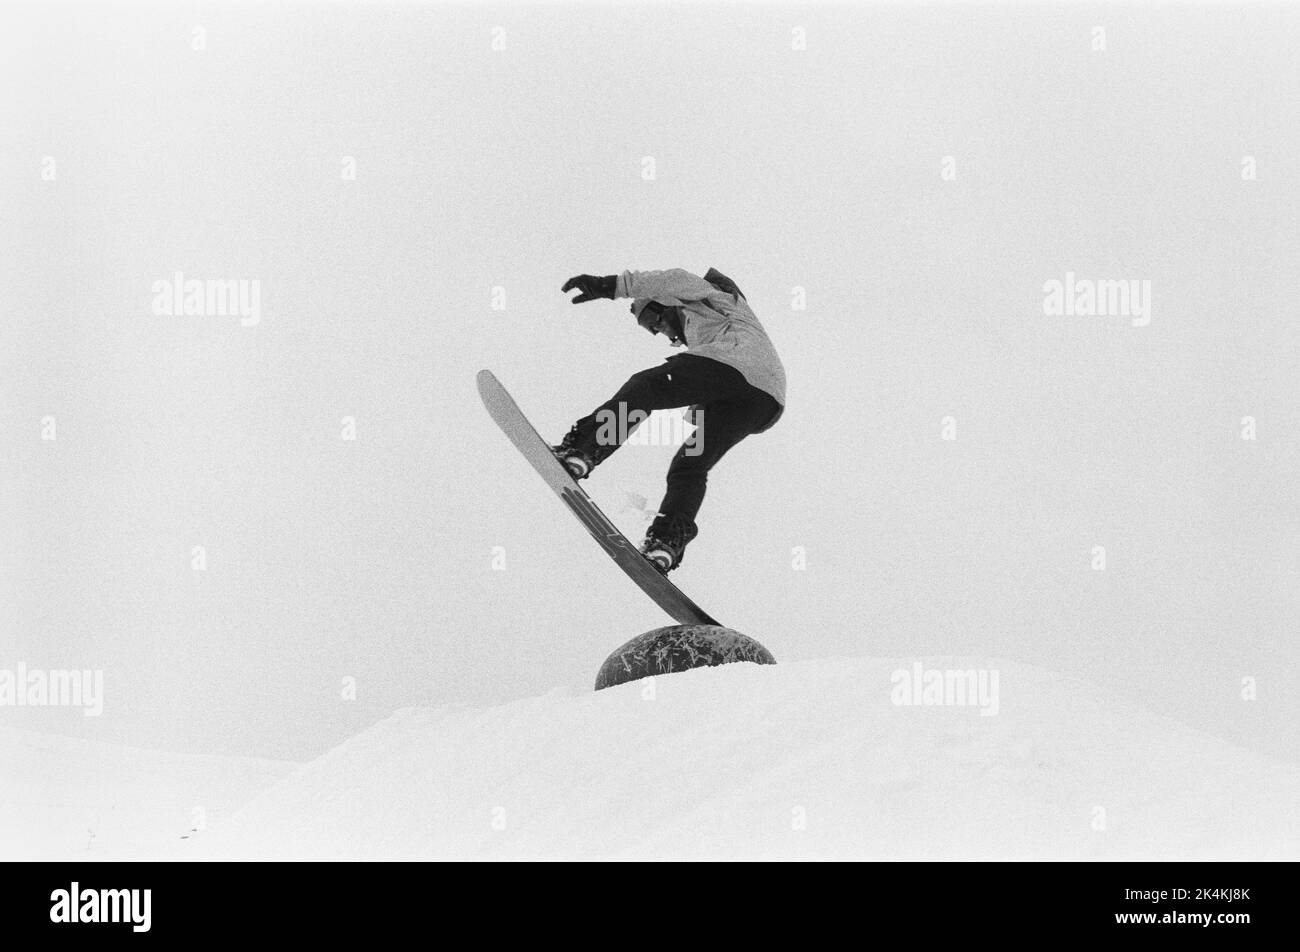 Snowboarder at Alpe D'Huez ski resort in the French Alps. Stock Photo